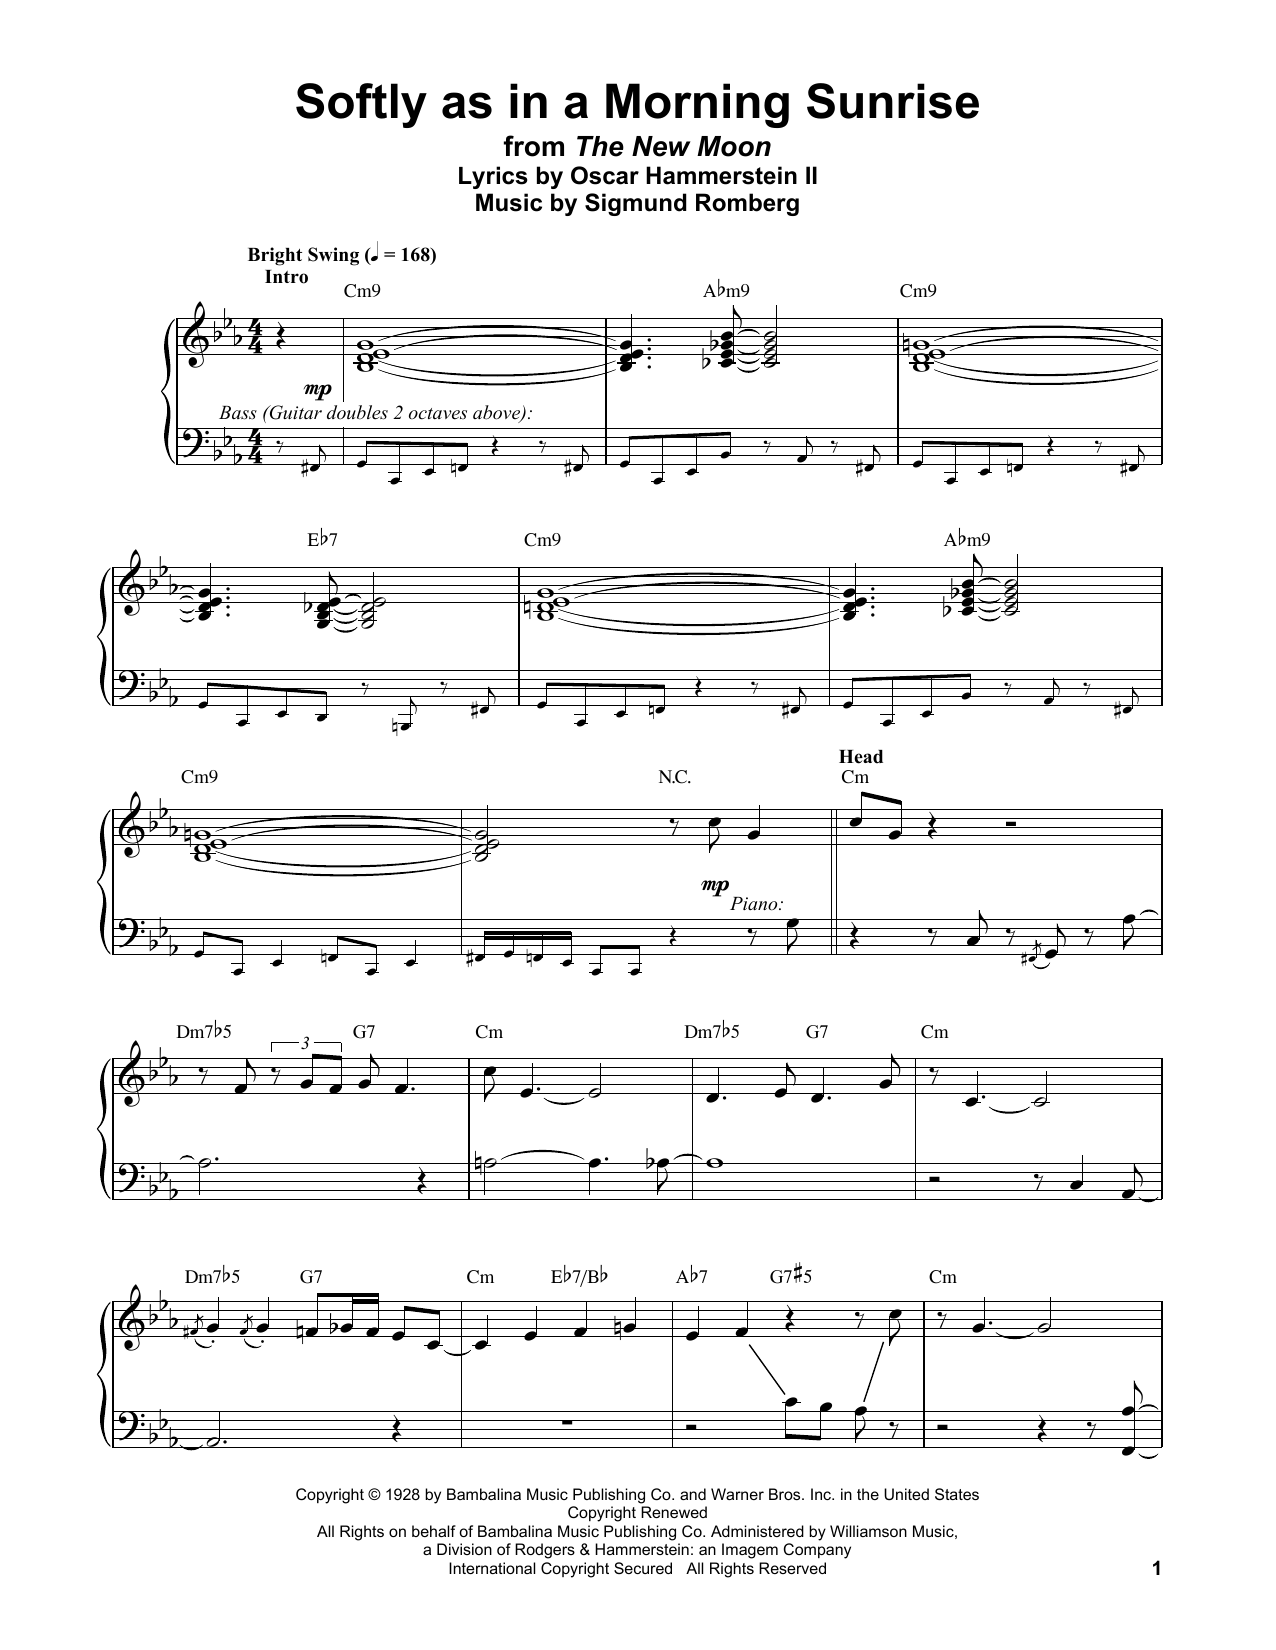 Download Vince Guaraldi Softly As In A Morning Sunrise Sheet Music